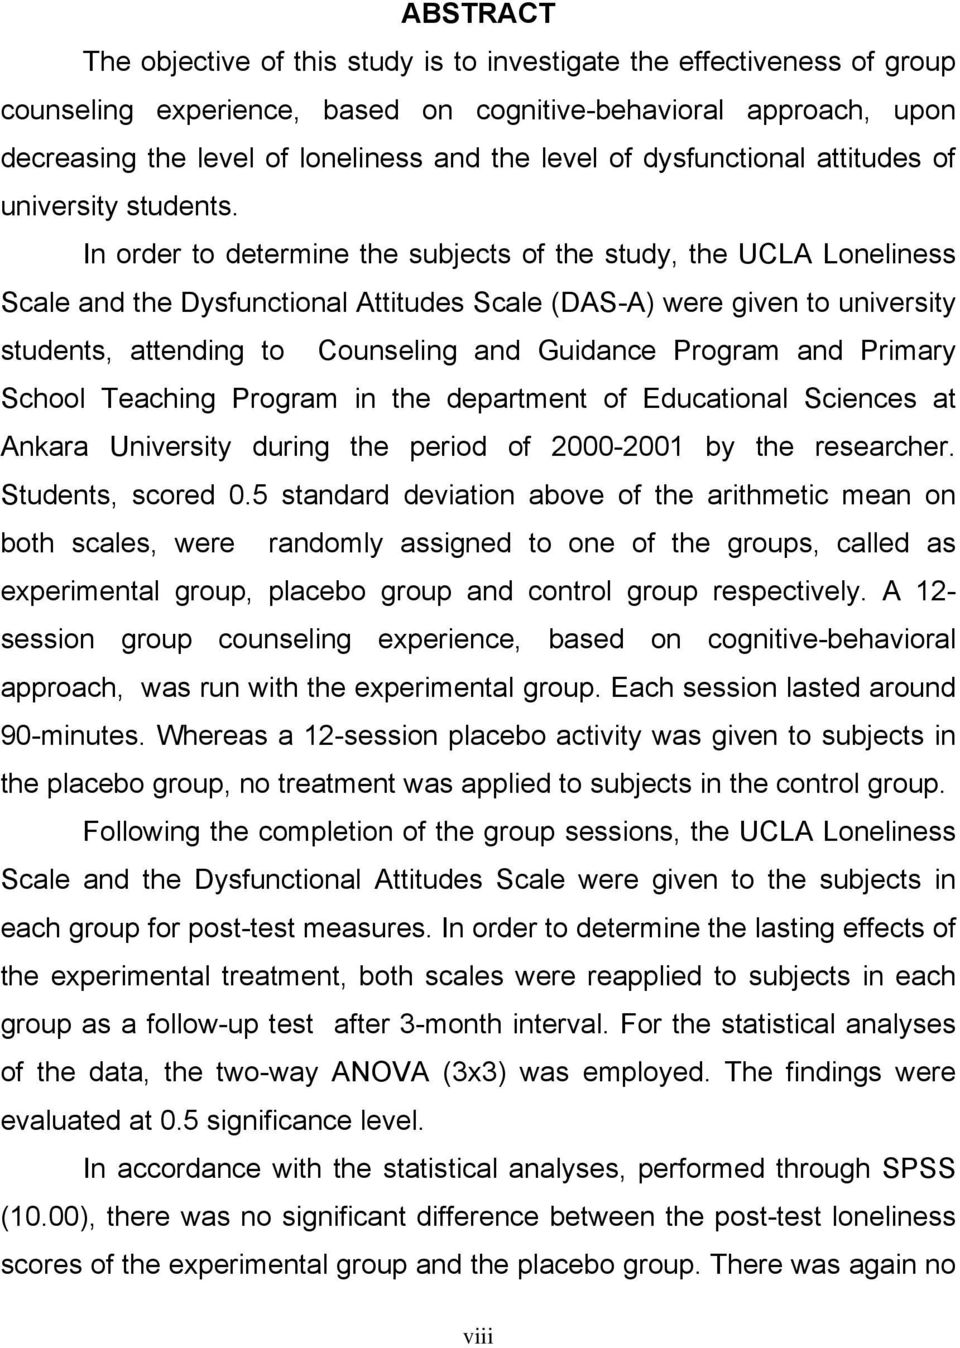 In order to determine the subjects of the study, the UCLA Loneliness Scale and the Dysfunctional Attitudes Scale (DAS-A) were given to university students, attending to Counseling and Guidance